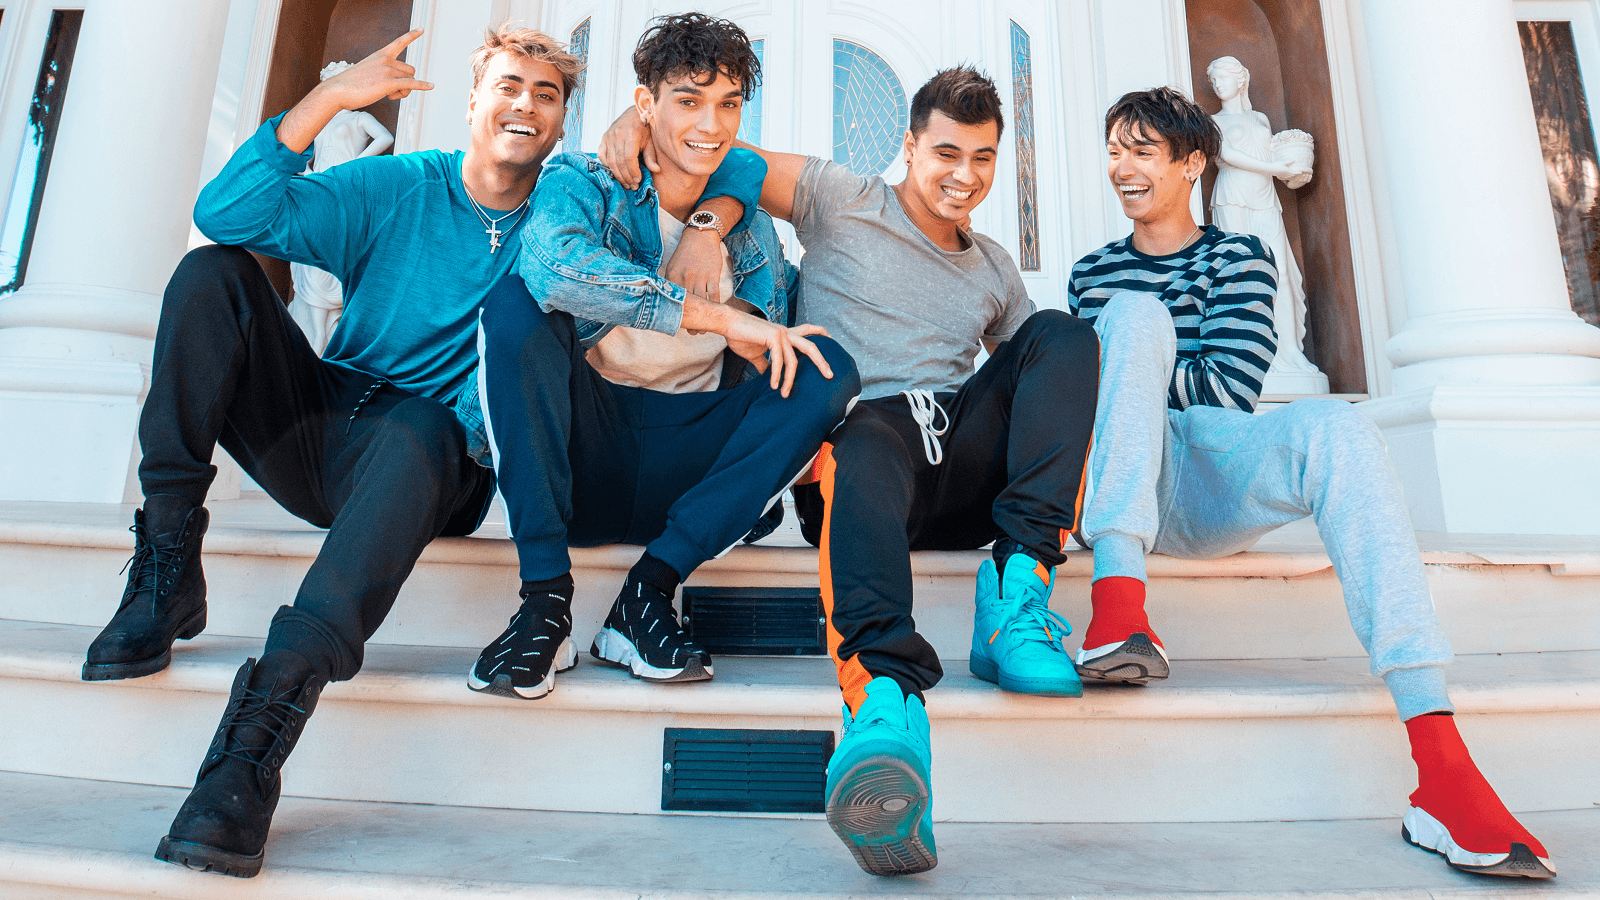 Dobre Brothers Set 21 City Live Tour In 2019